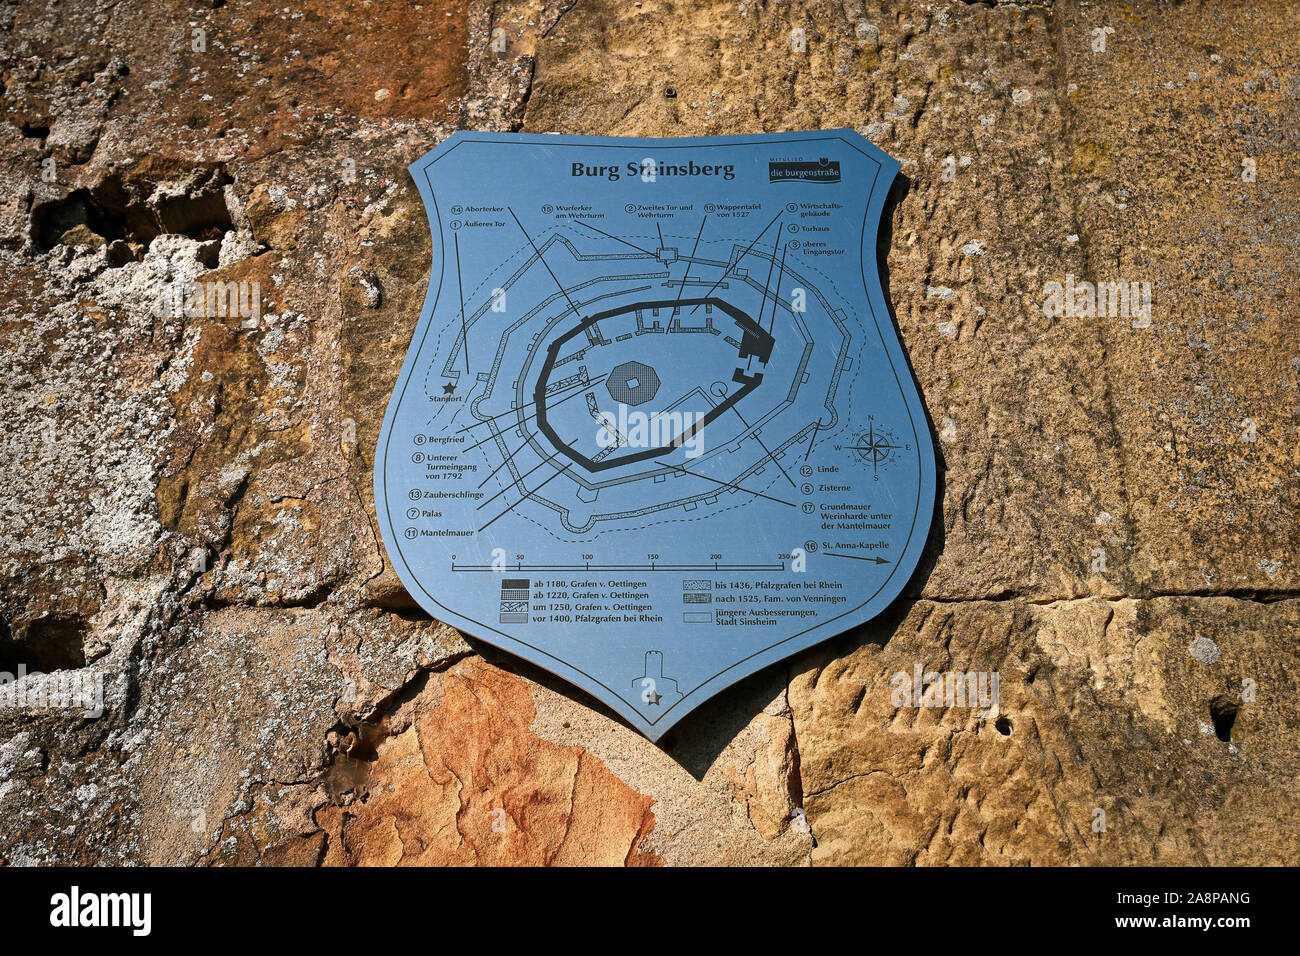 Sinsheim, Germany - November 2019: Metallic sign in shape of coat of arms showing layout of medivial German fortress called 'Burg Steinsberg' Stock Photo